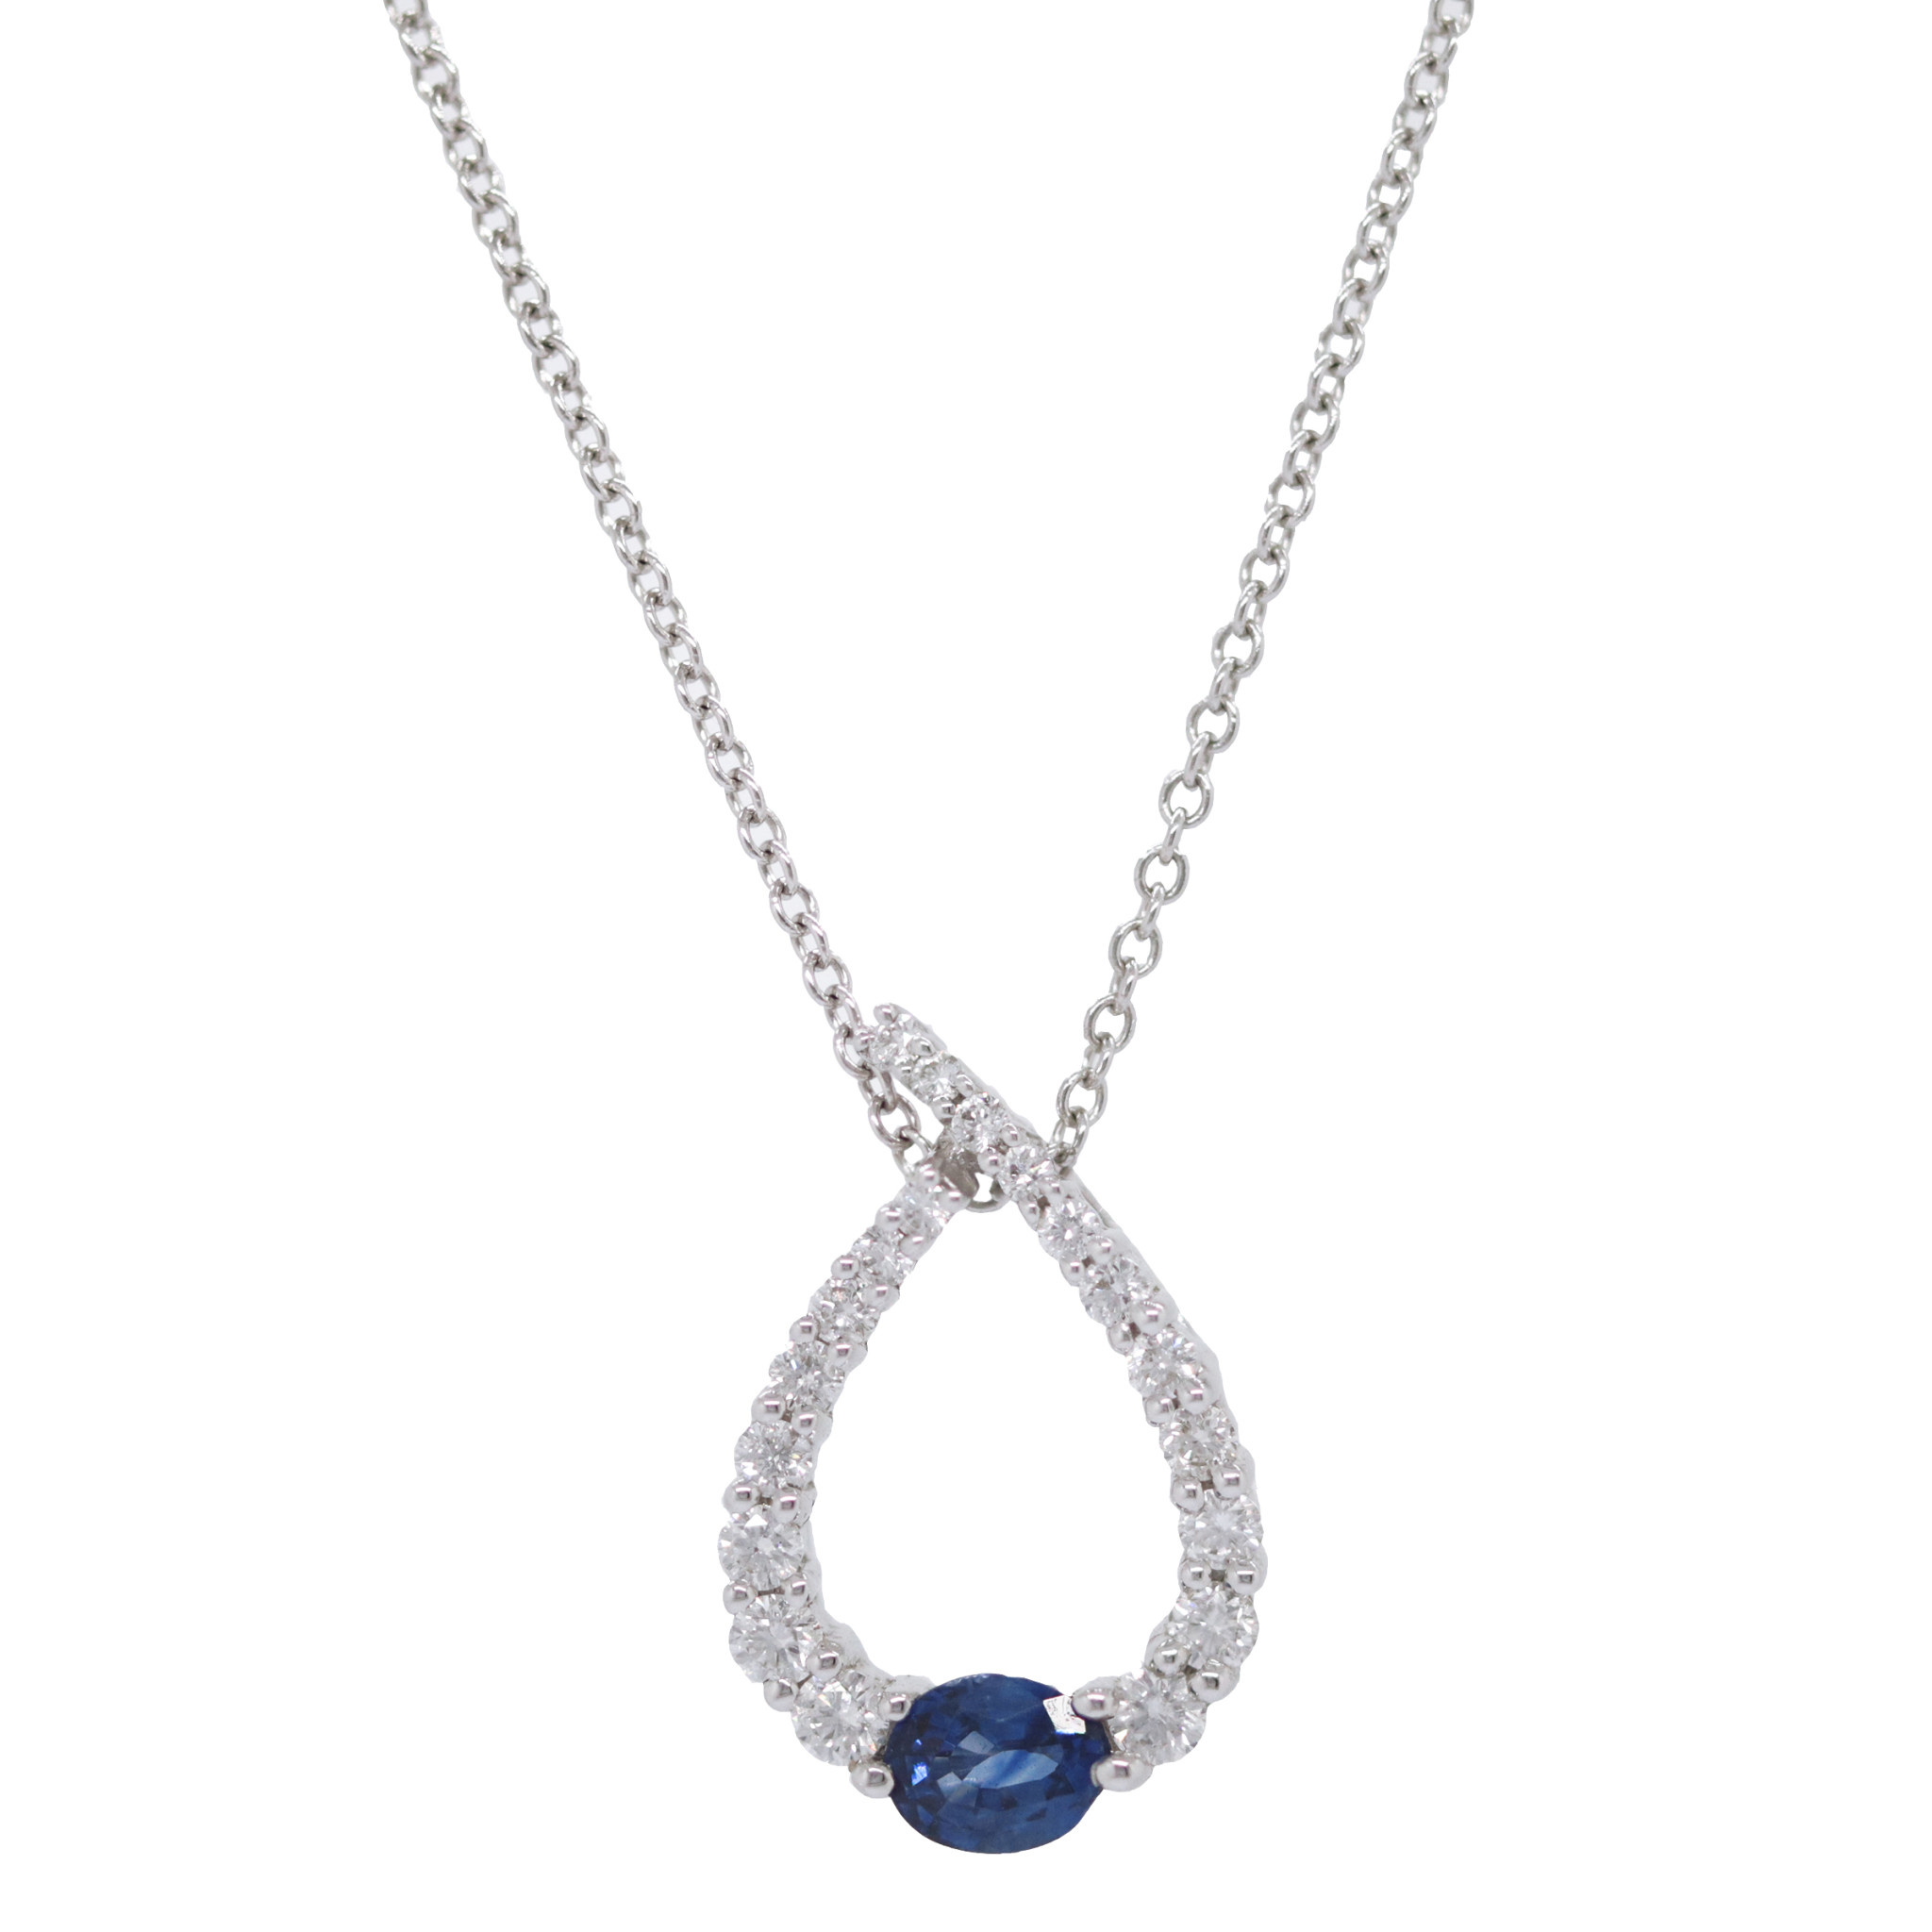 Signature Collection 14k White Gold Oval Sapphire and Diamond Necklace  ELI84988SS - Emerald Lady Jewelry